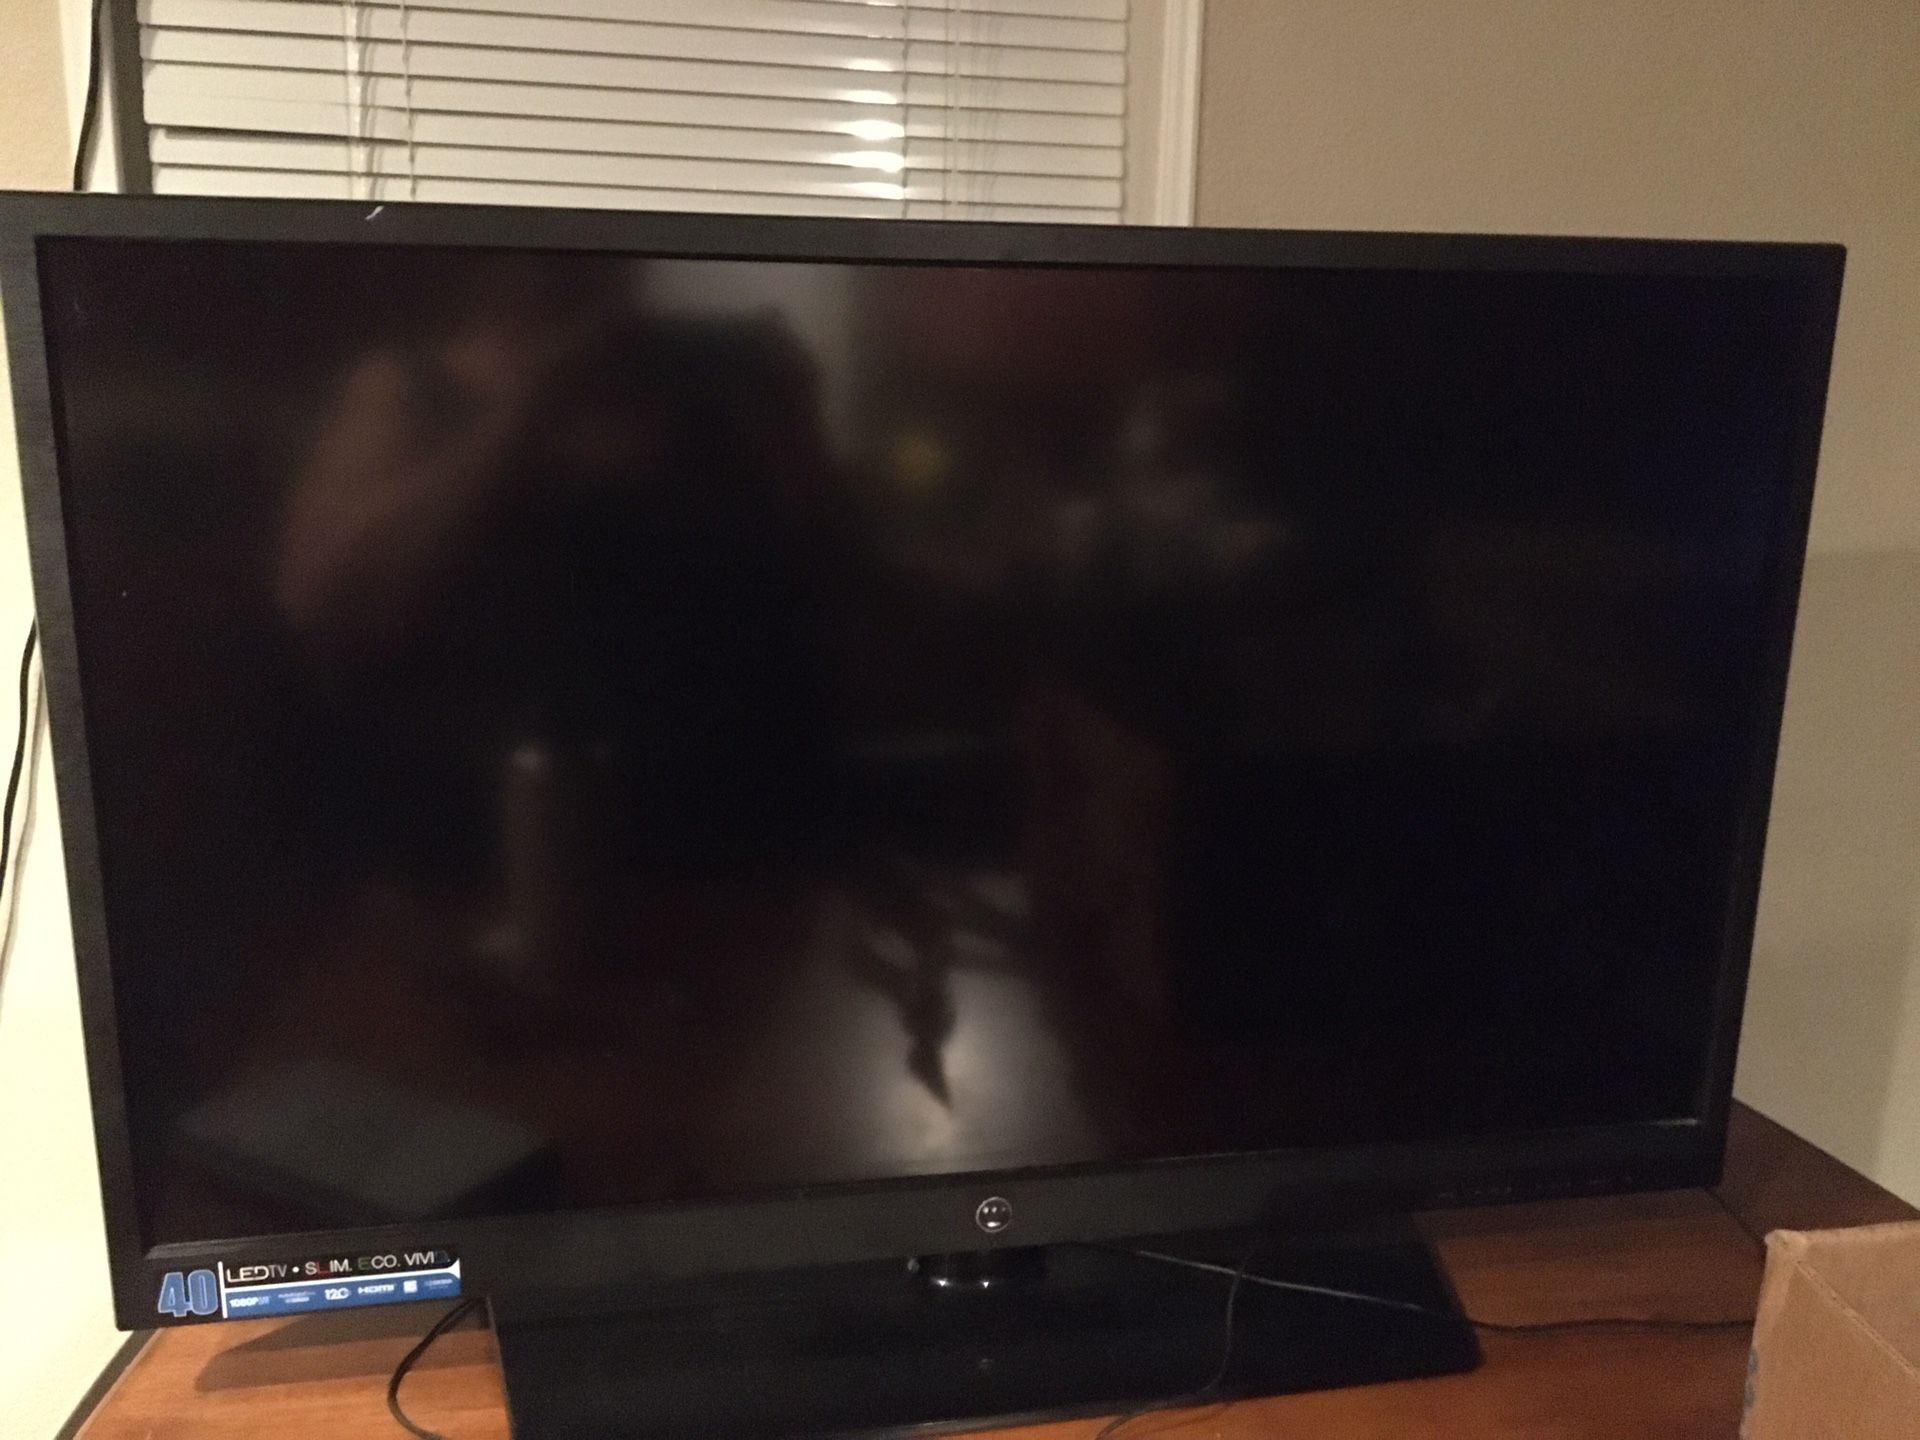 40 inches western house tv I don’t know if it works no corder was given to me AS IS